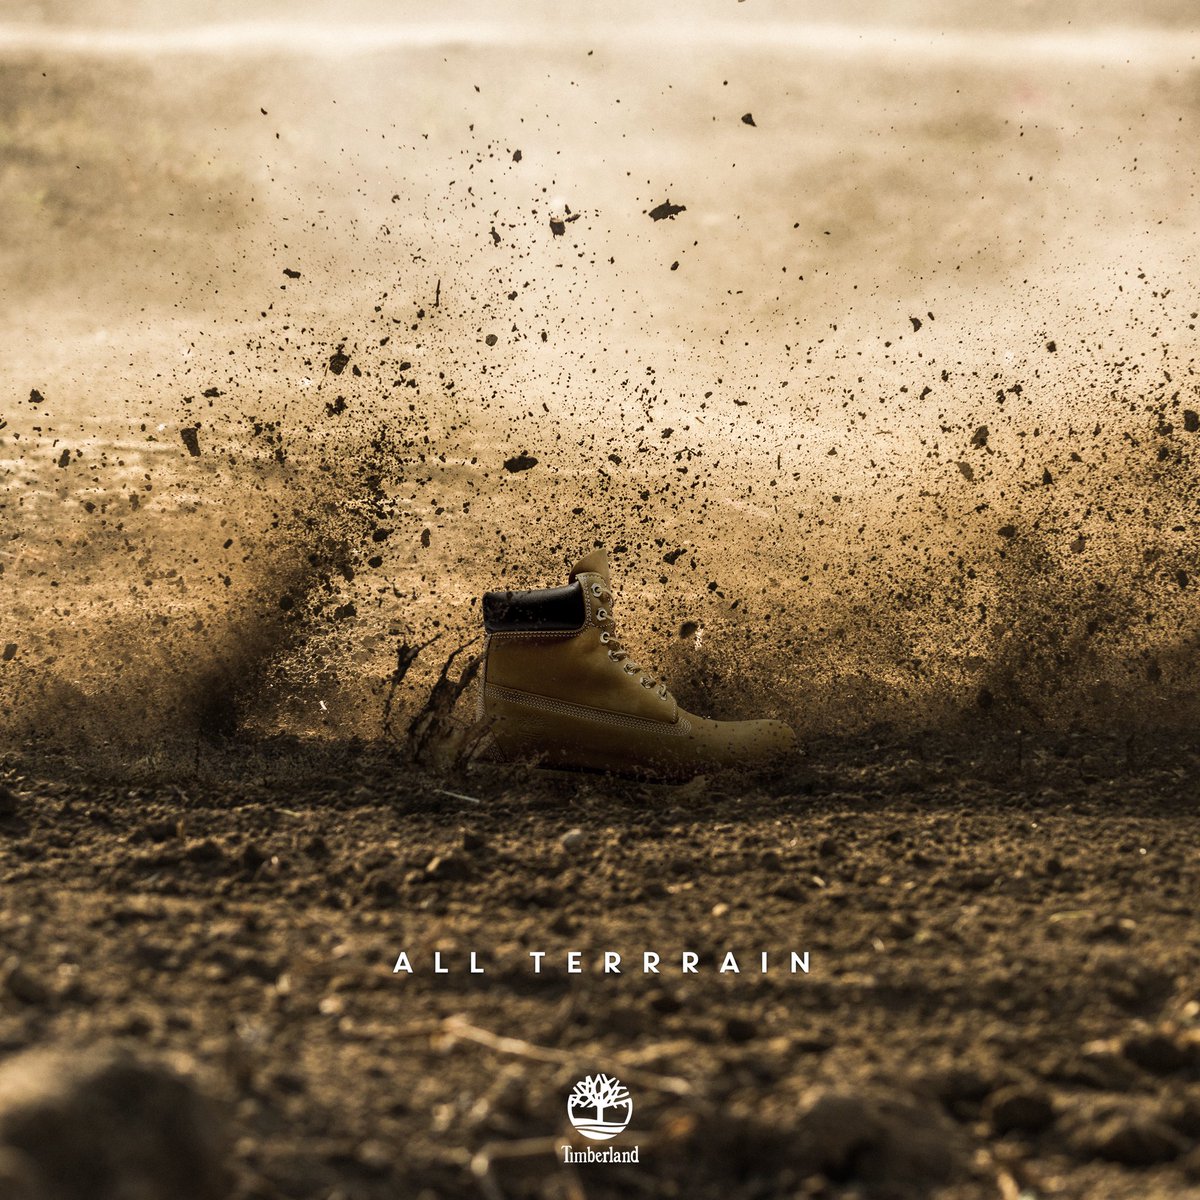 Made a mock  @Timberland ad using the next two images.  #100DaysOfDesign